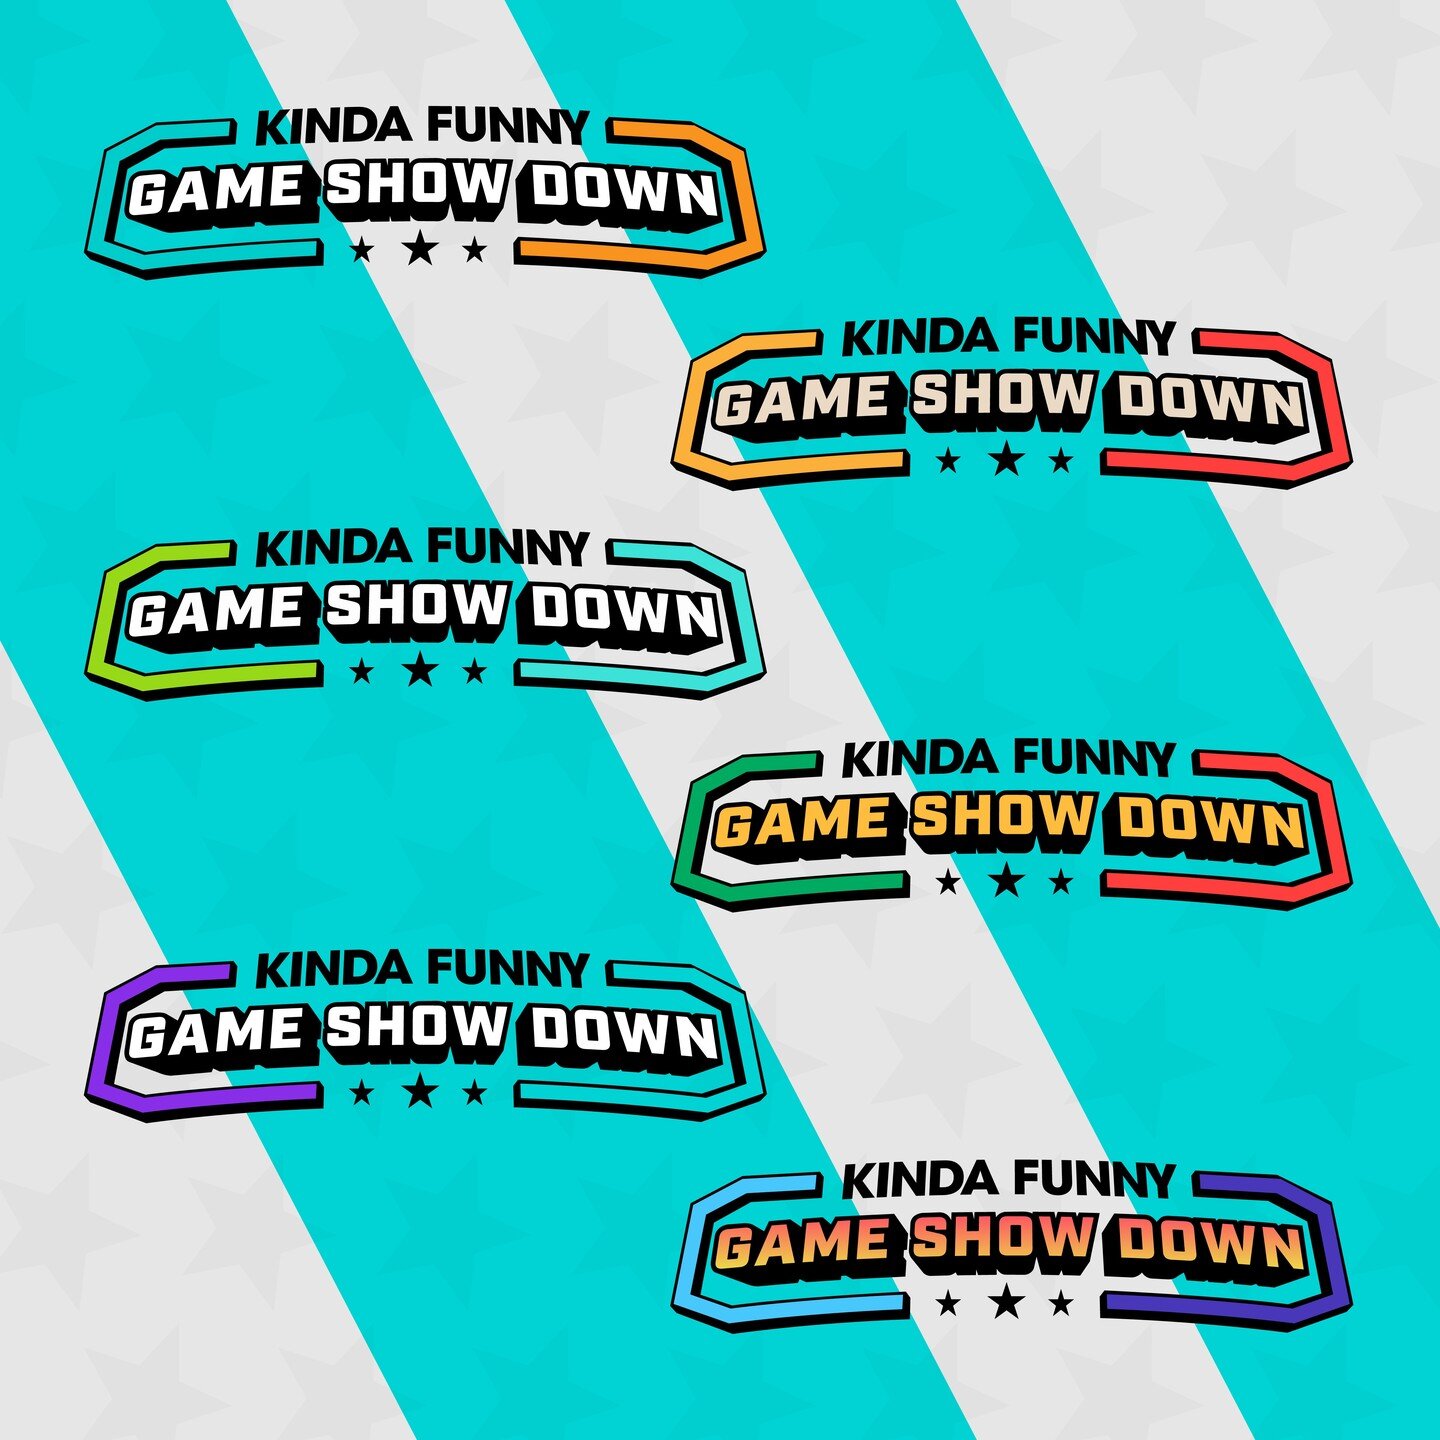 Logo design for @kindafunnyvids new game show series called Kinda Funny Game Showdown hosted by @blessingjr.

These are the variant color options of the main show logo that were meant to be used alongside each mini-game potentially.

#campfiredesign 